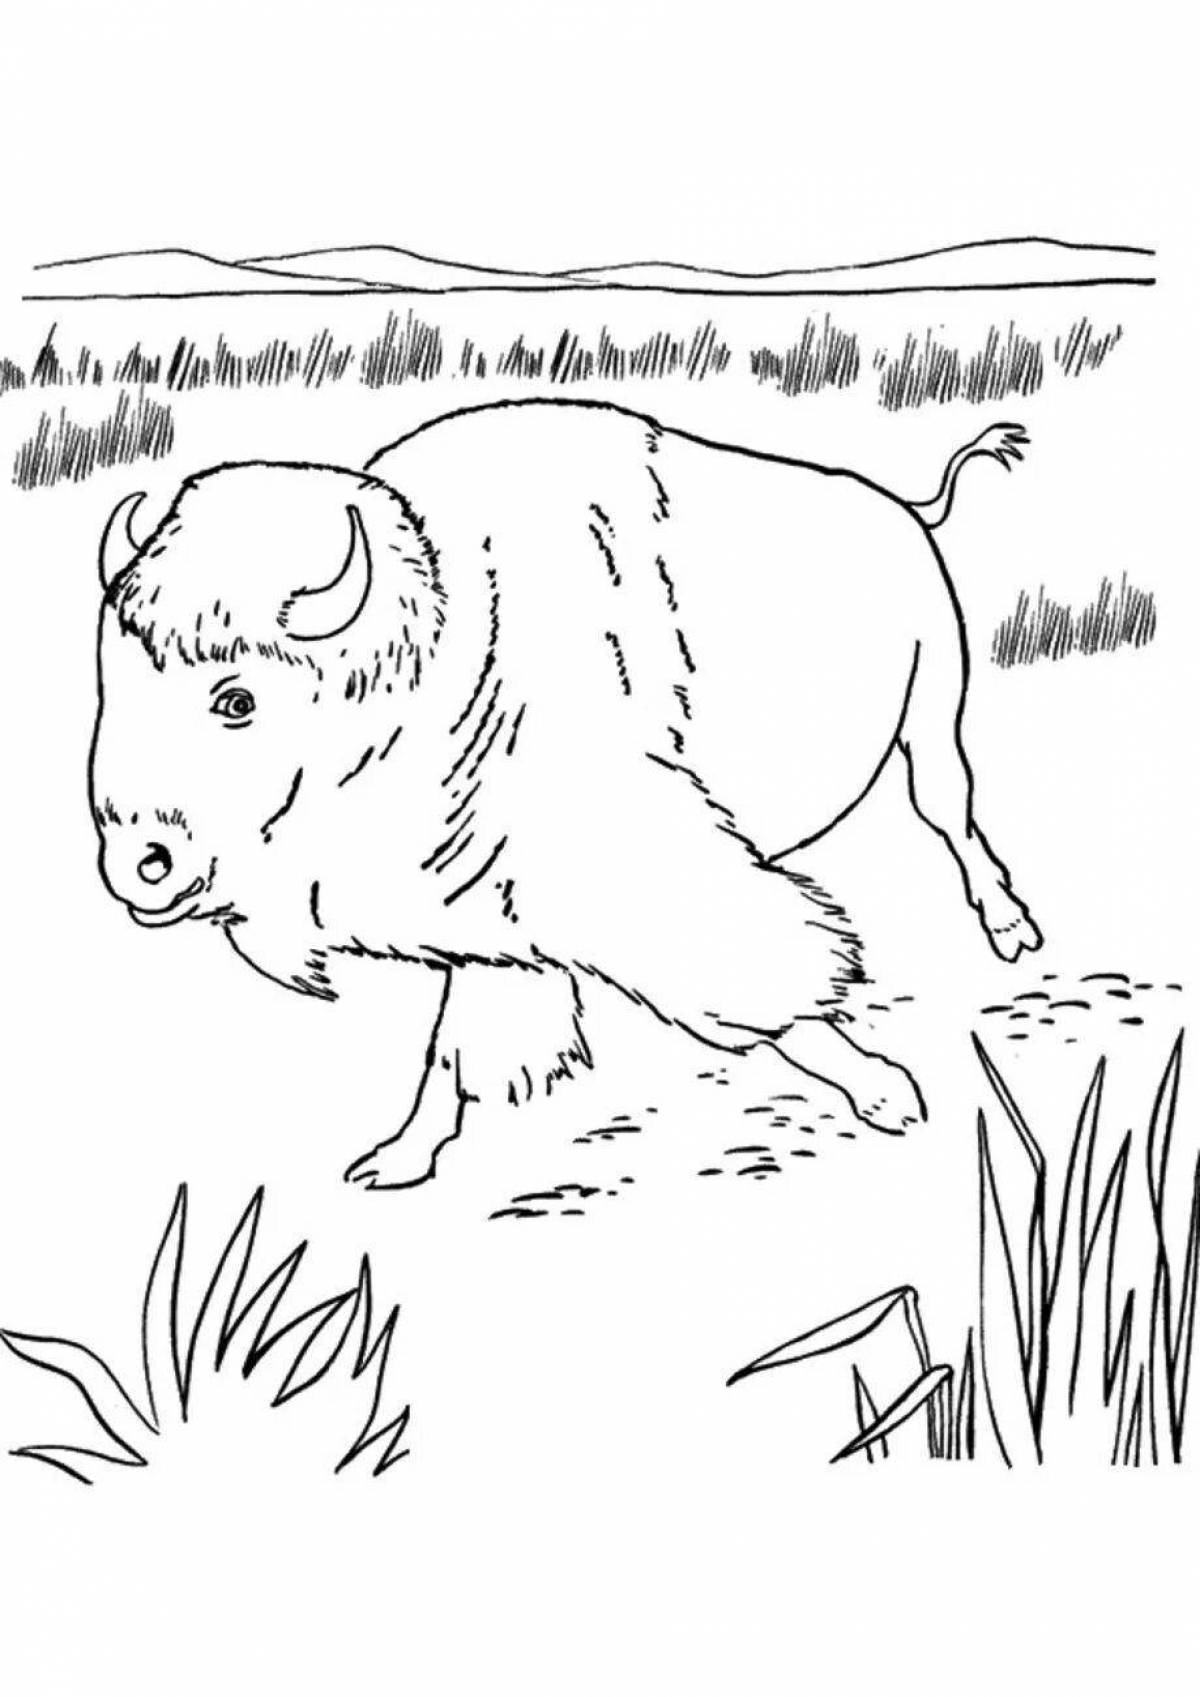 Wonderful Russian animals coloring pages for kids